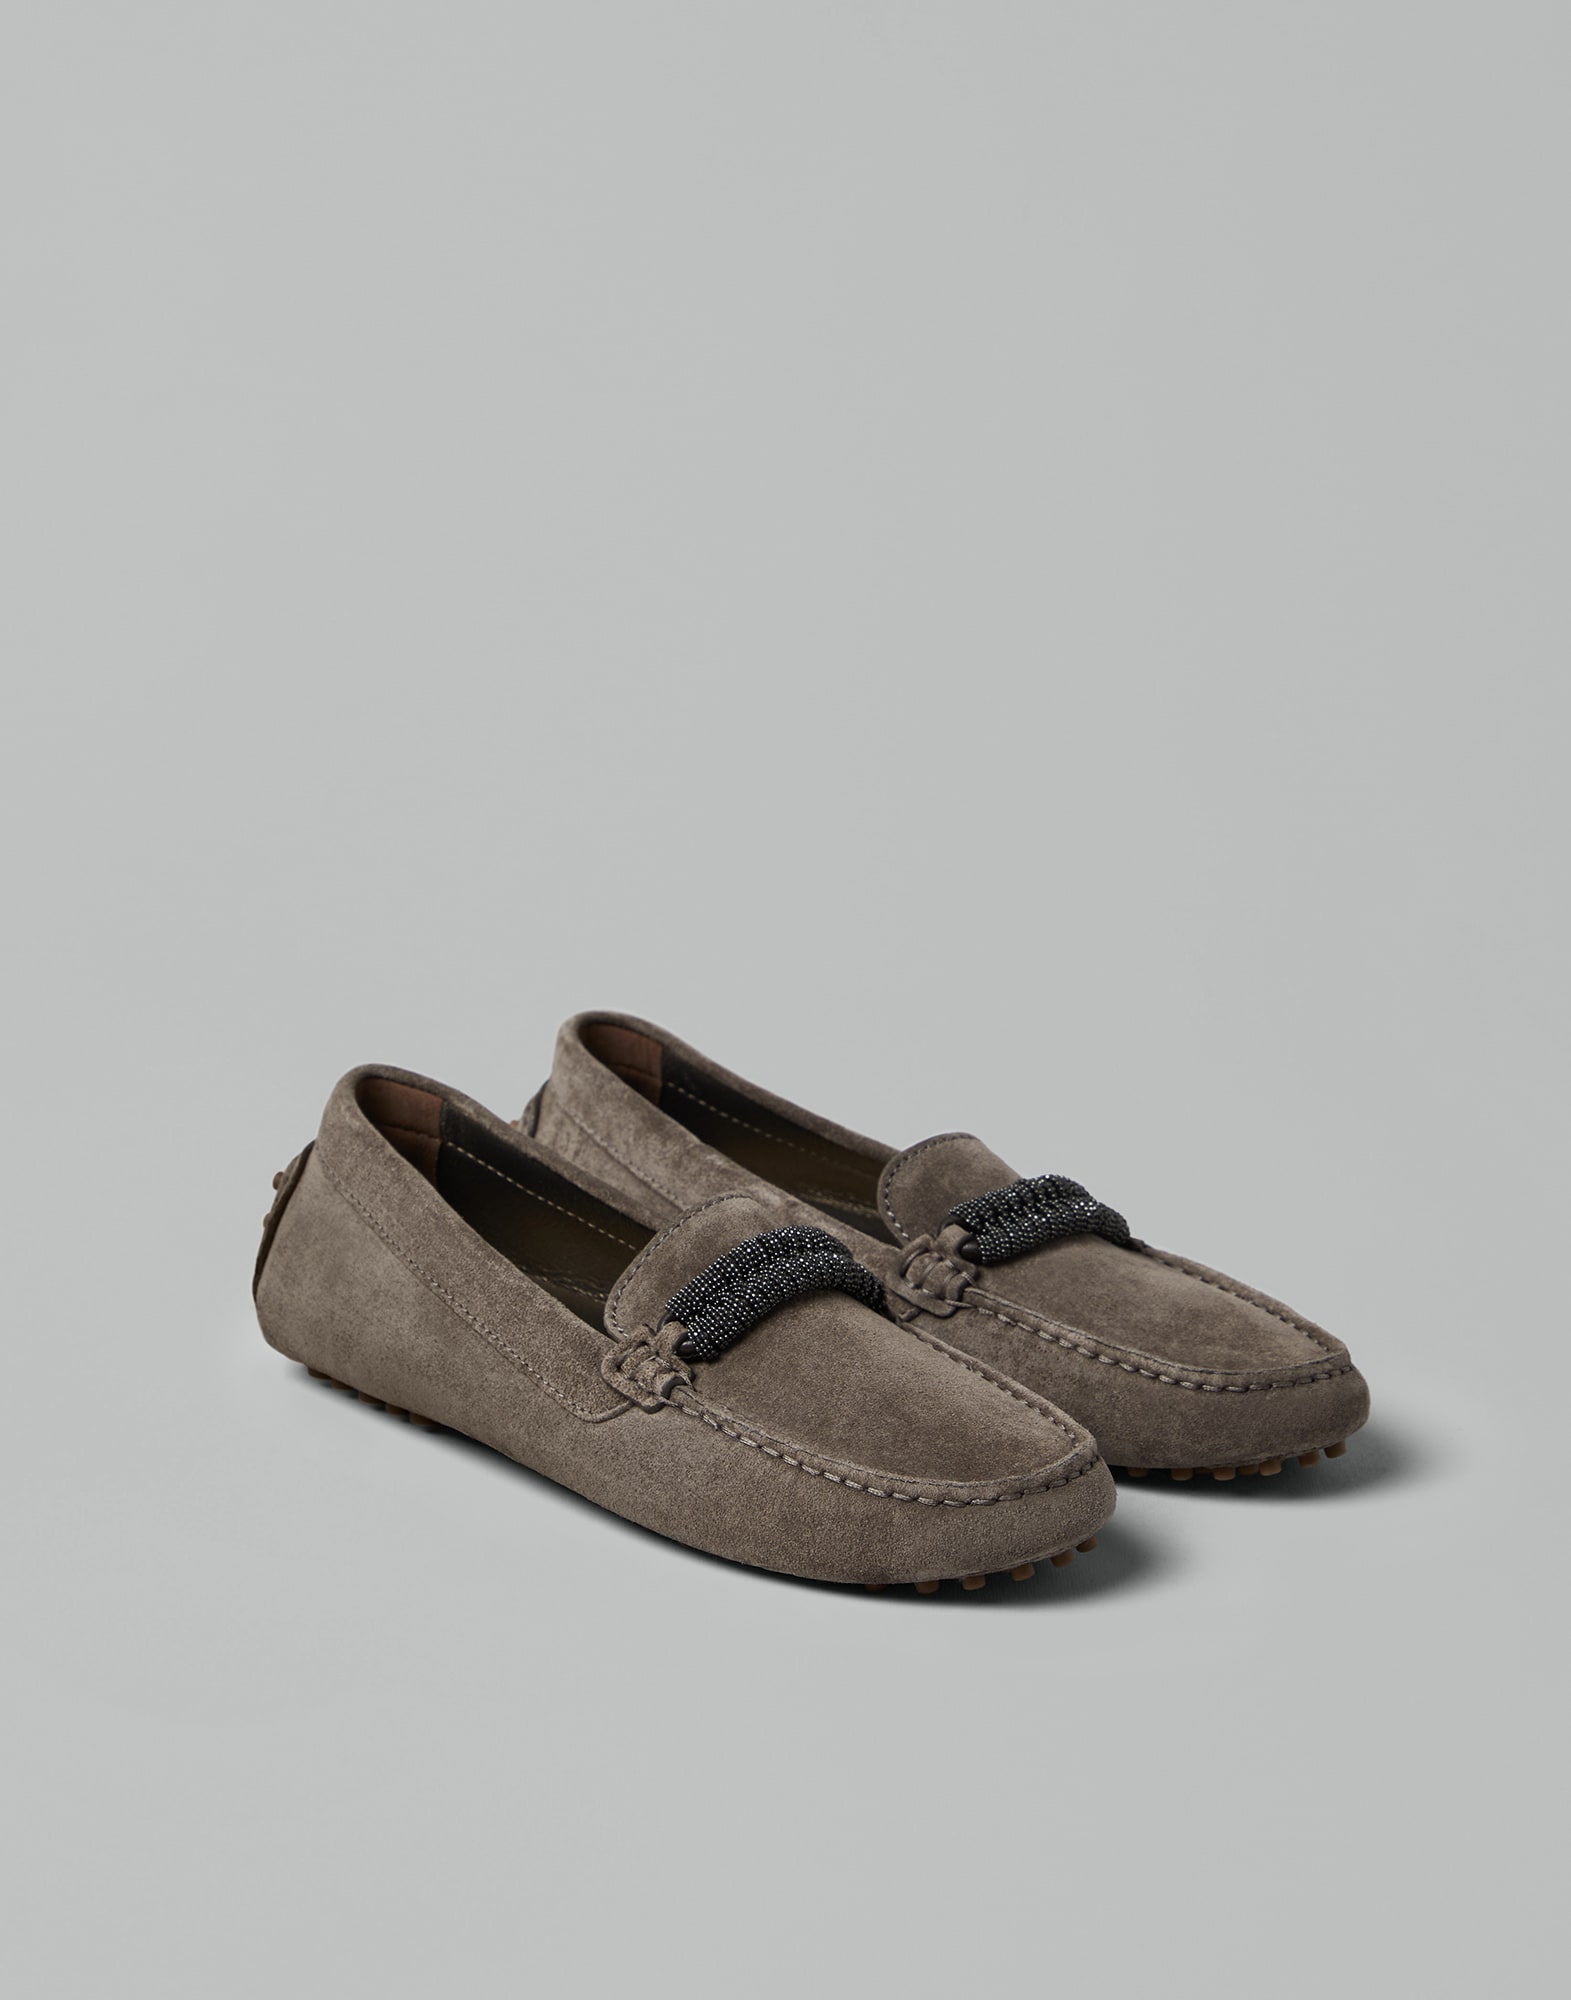 Driving shoes Brown Woman - Brunello Cucinelli